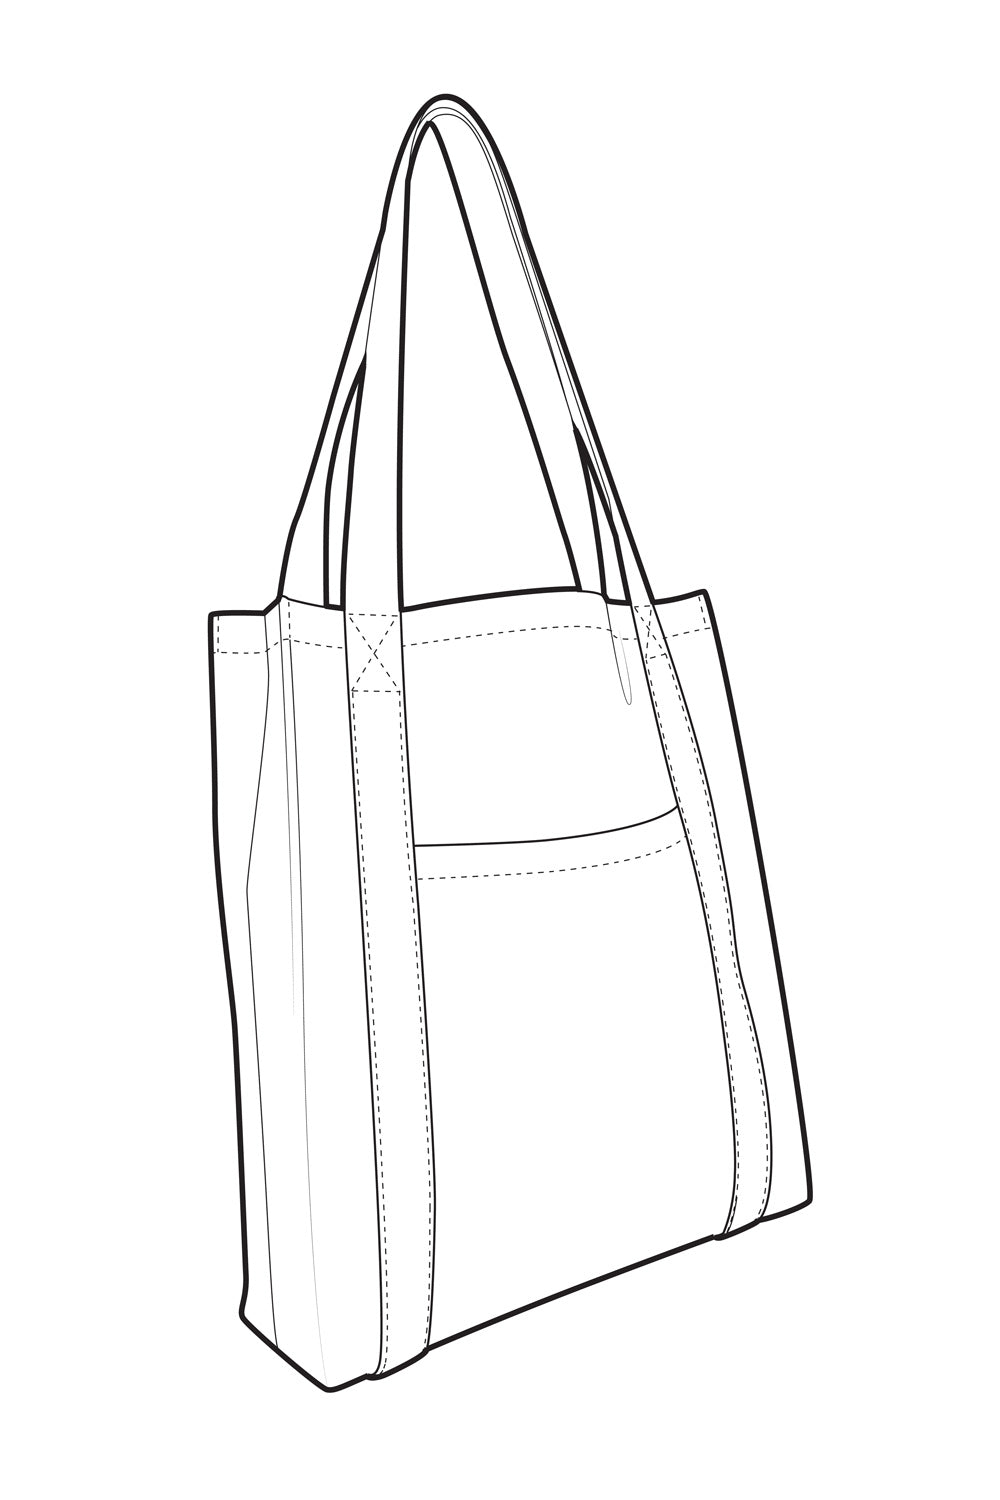 The Madrid Tote Bag - Victory Patterns